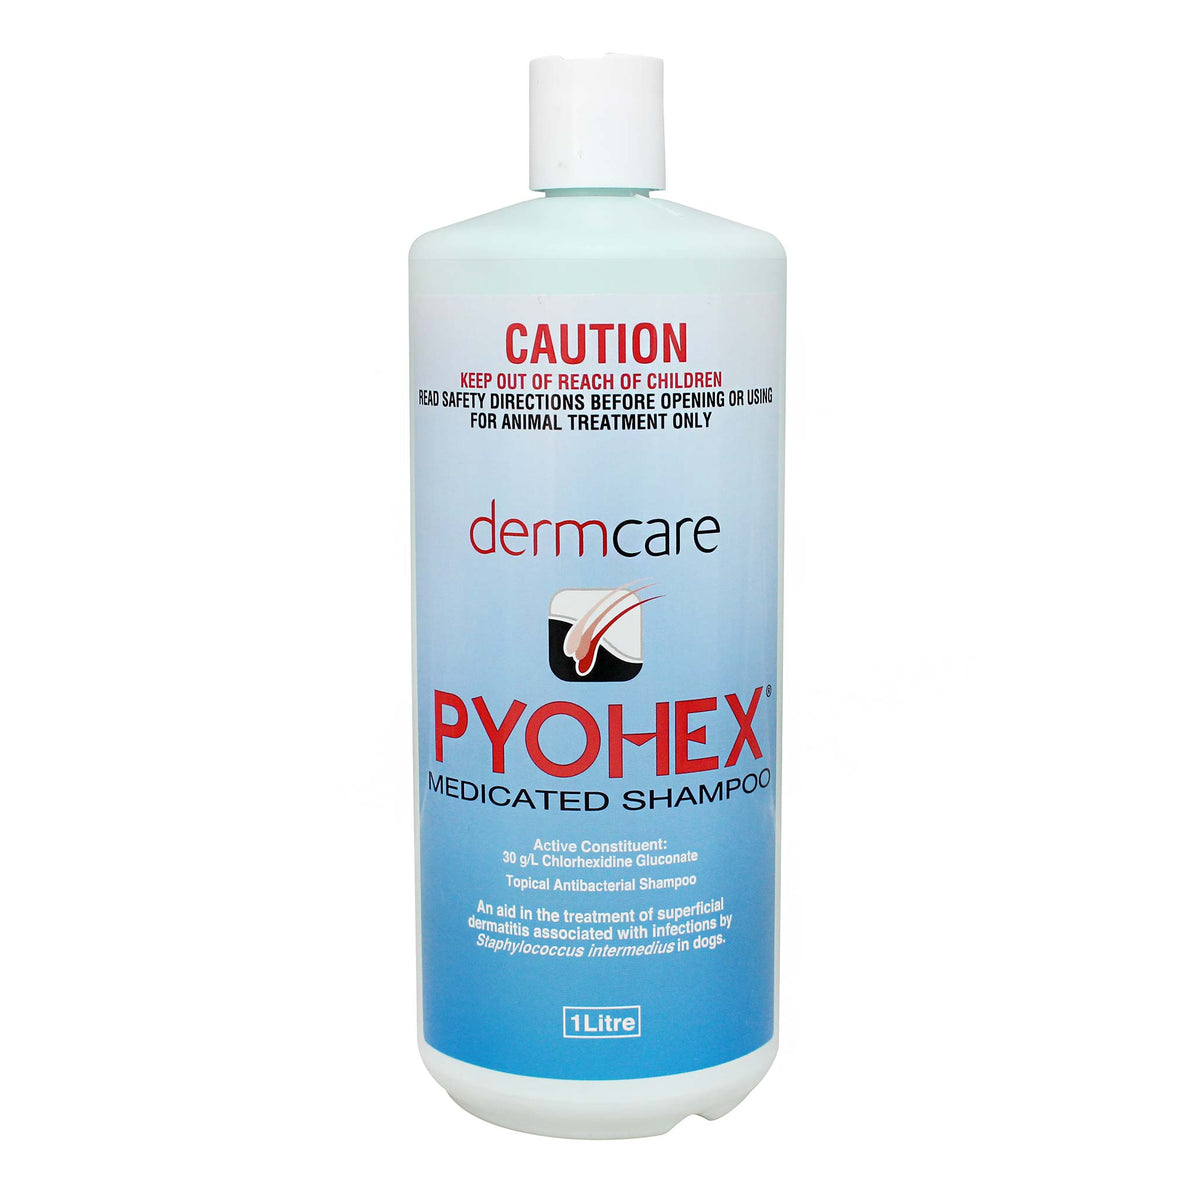 Pyohex Medicated Shampoo for Bacterial Skin Infections in Dogs